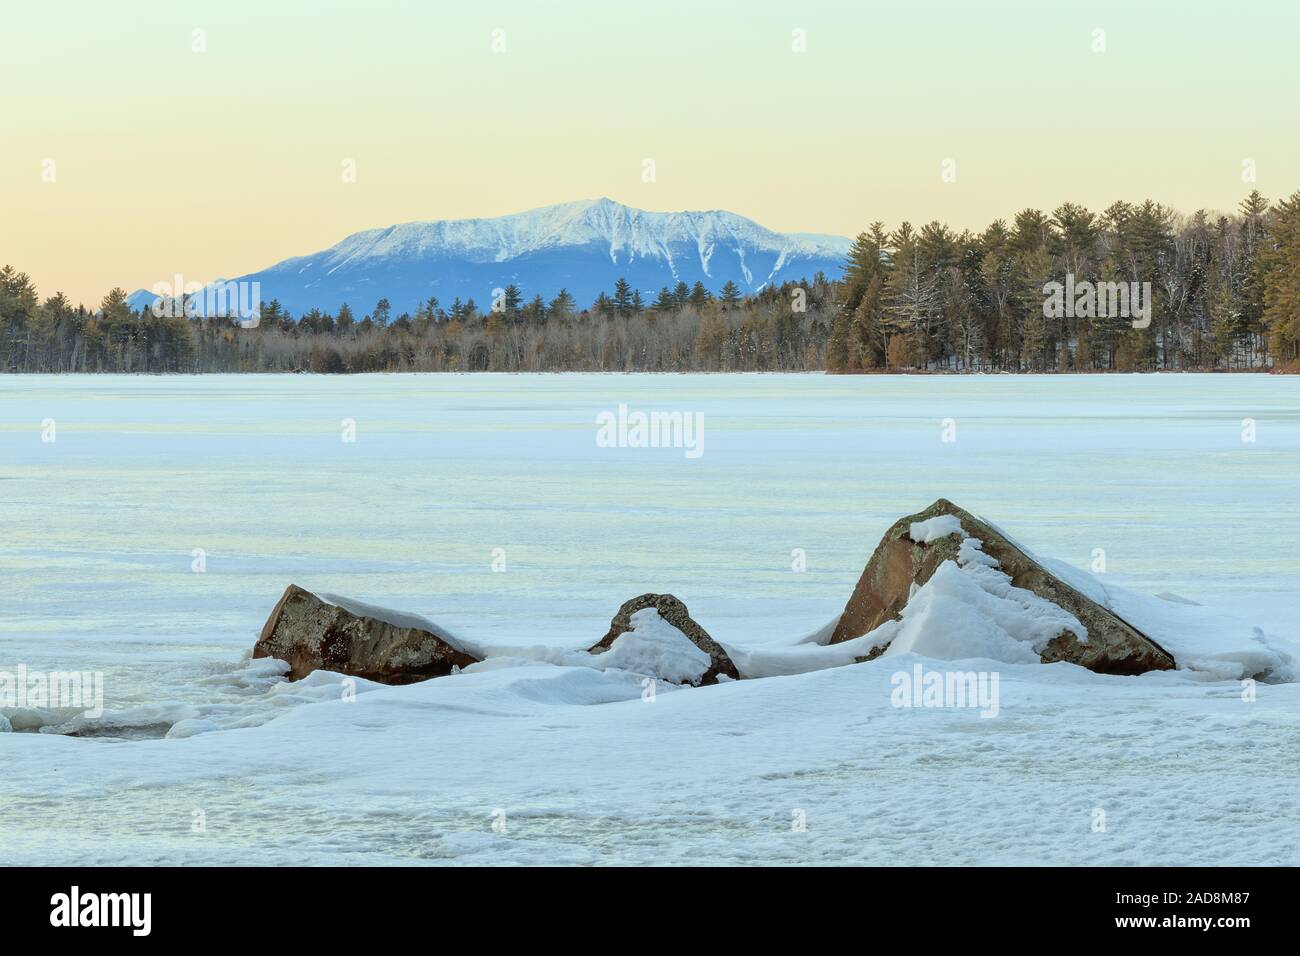 Katahdin behind a frozen pond with jagged rocks in the foreground. Stock Photo